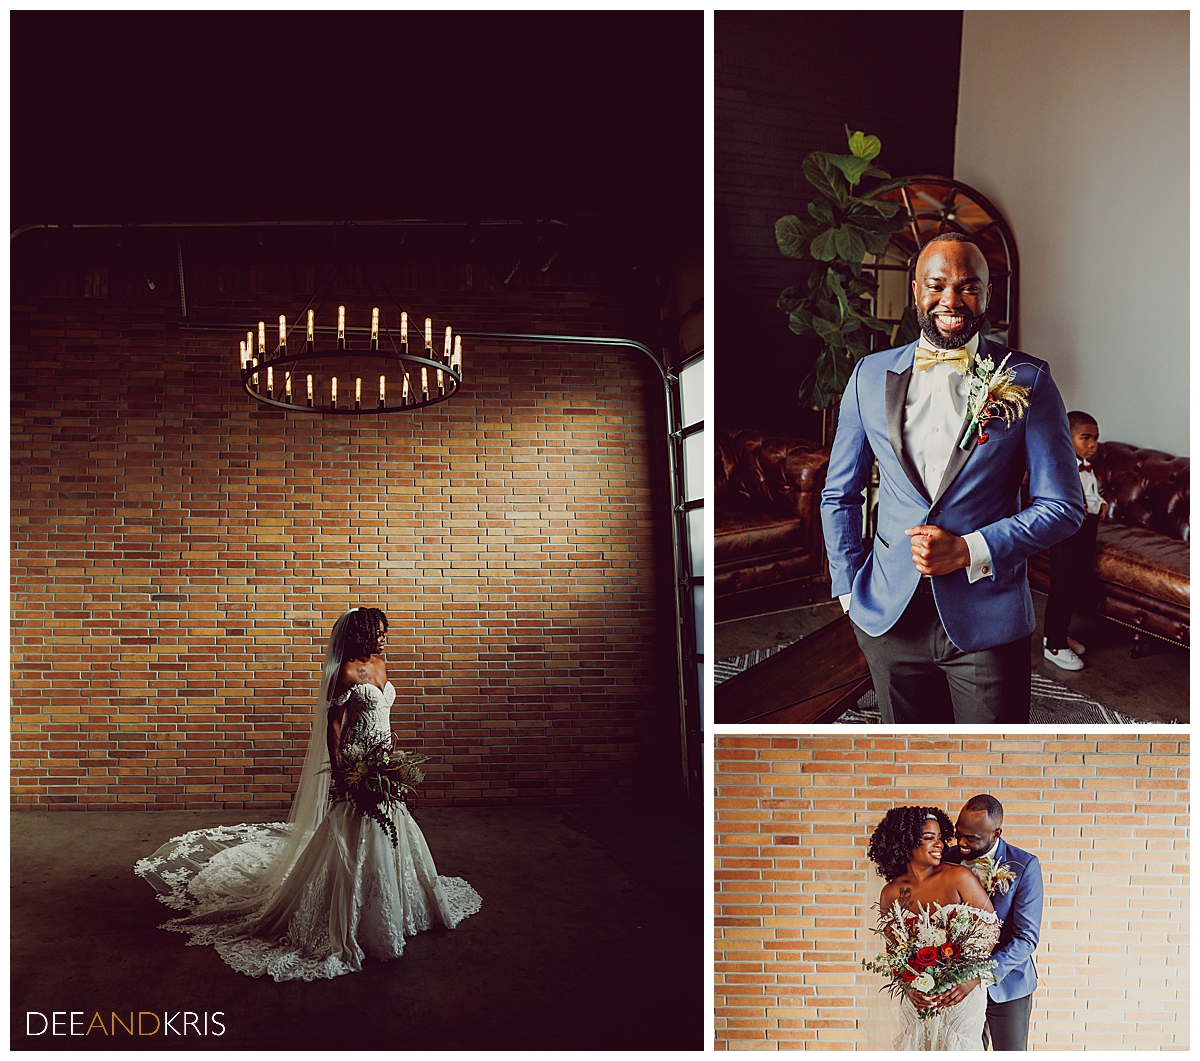 Three images: Left image of bride standing alone in shadow with beam of window light falling on her and chandelier above her. Top right image of Groom looking into camera holding suit jacket with youngest son standing behind him. Bottom right image of bride and groom against brick wall holding each other.